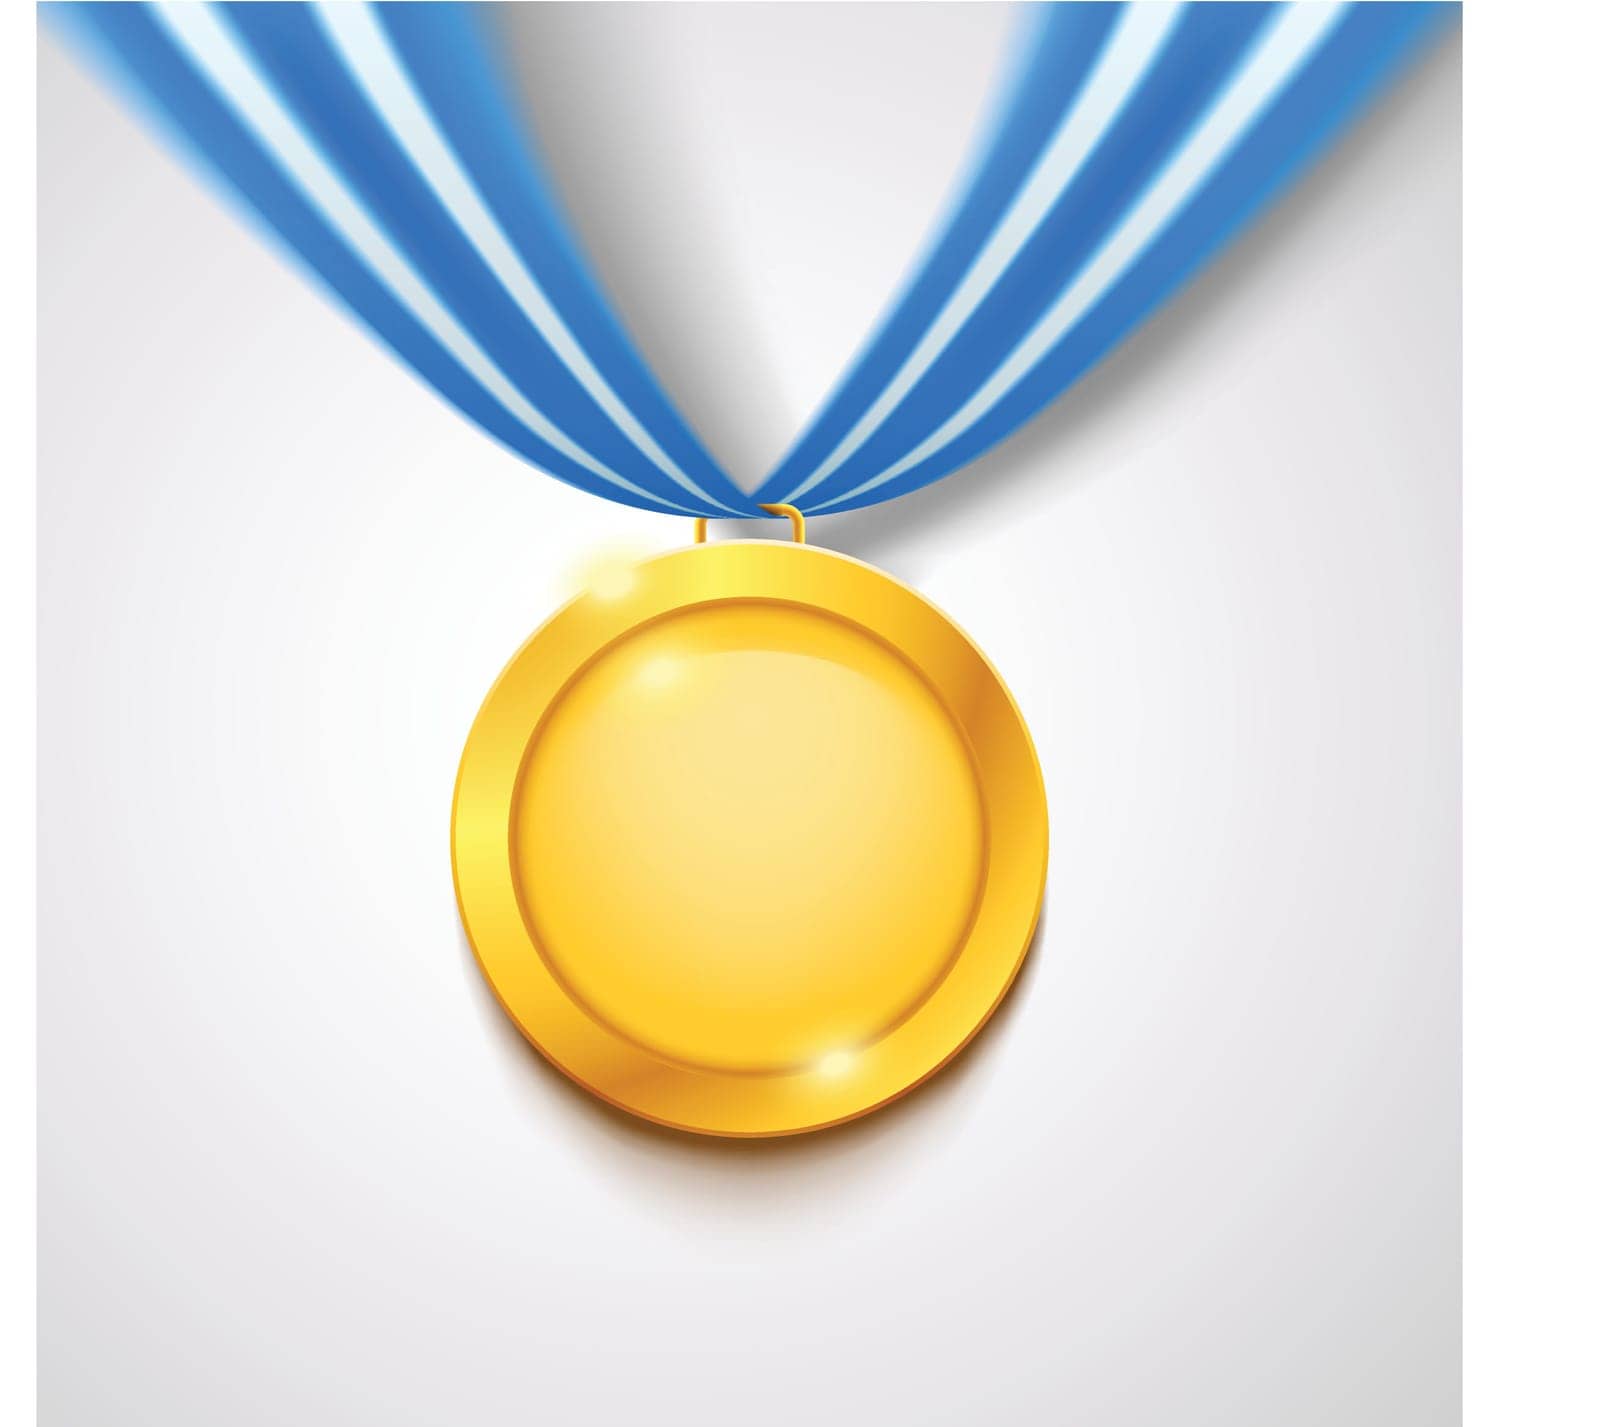 illustration of gold medal wit hblue white ribbon with soft shadow on bright background